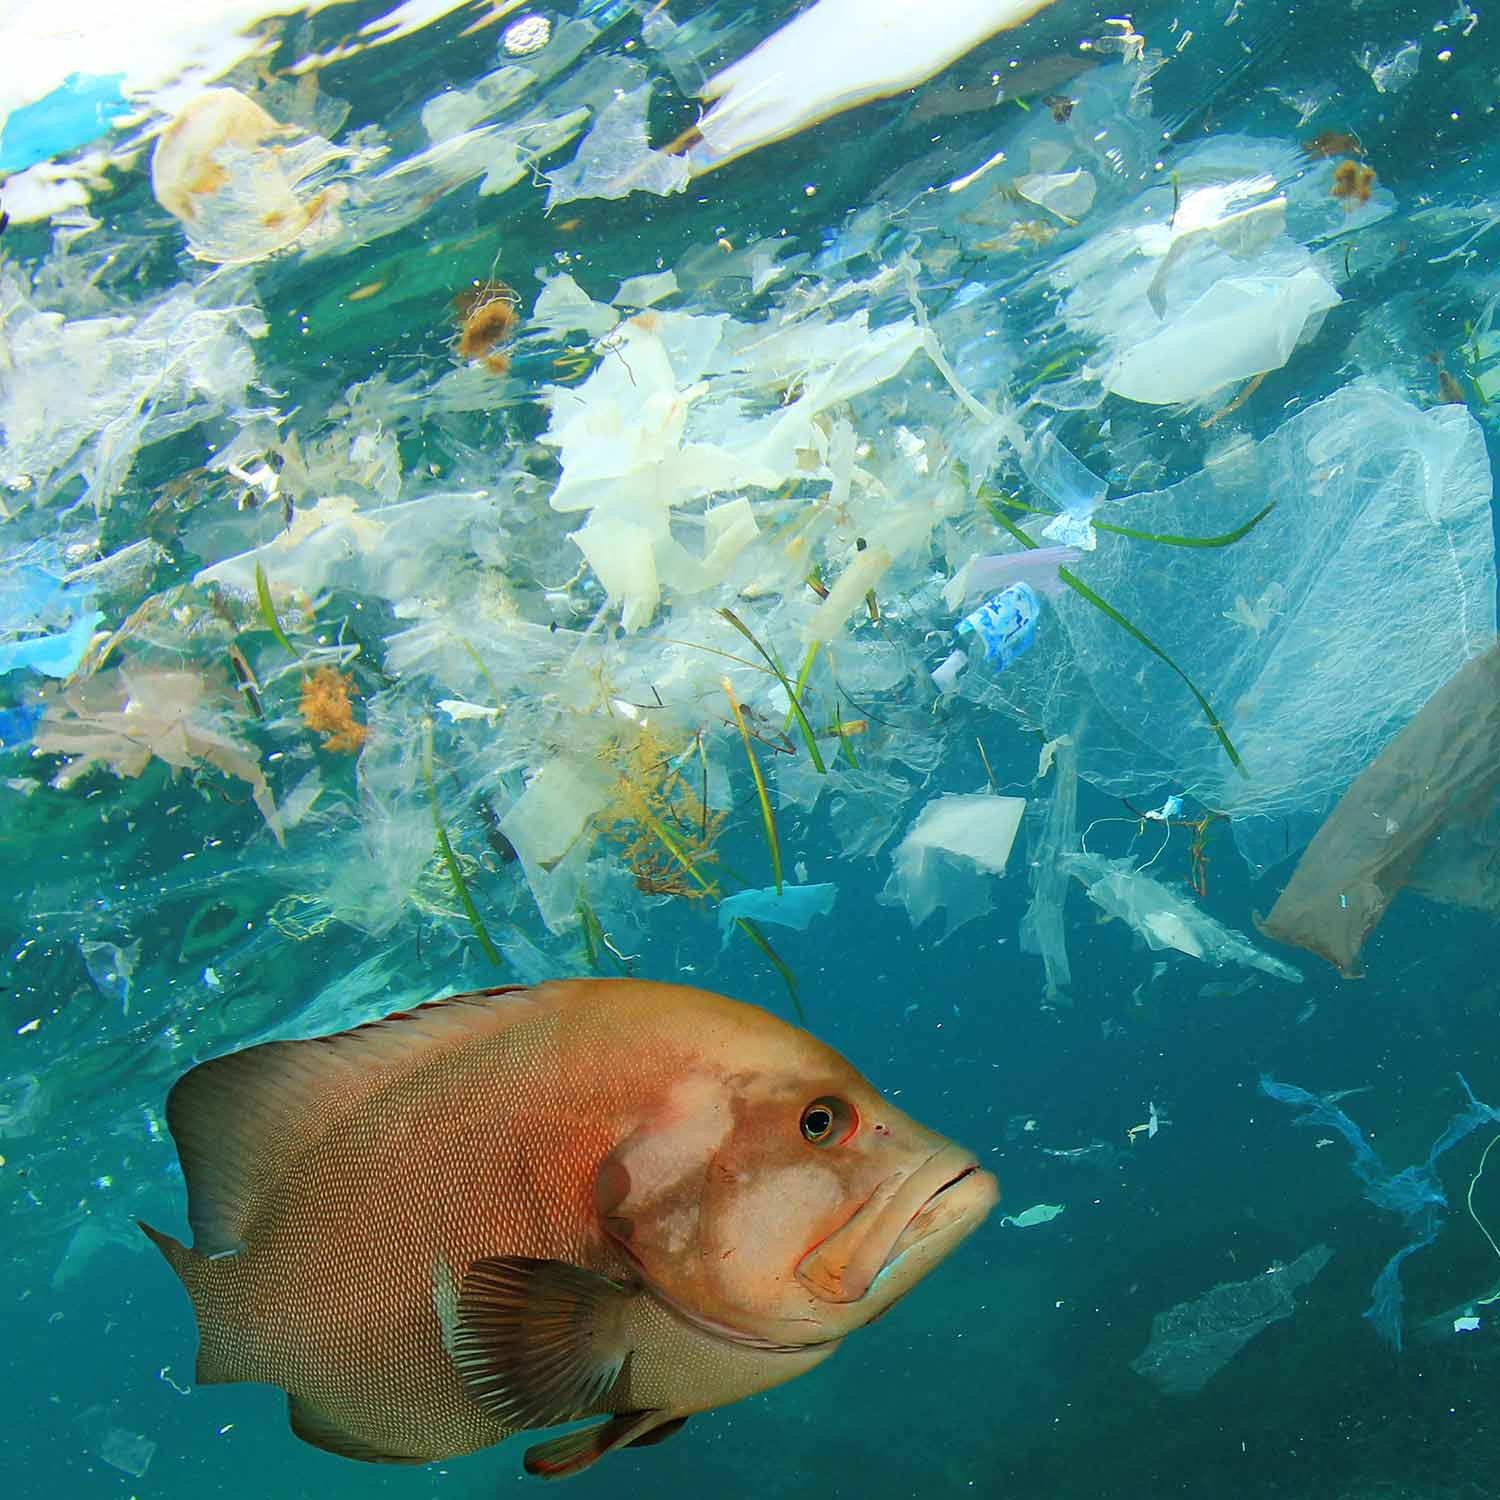 Image of fish in polluted with plastic water